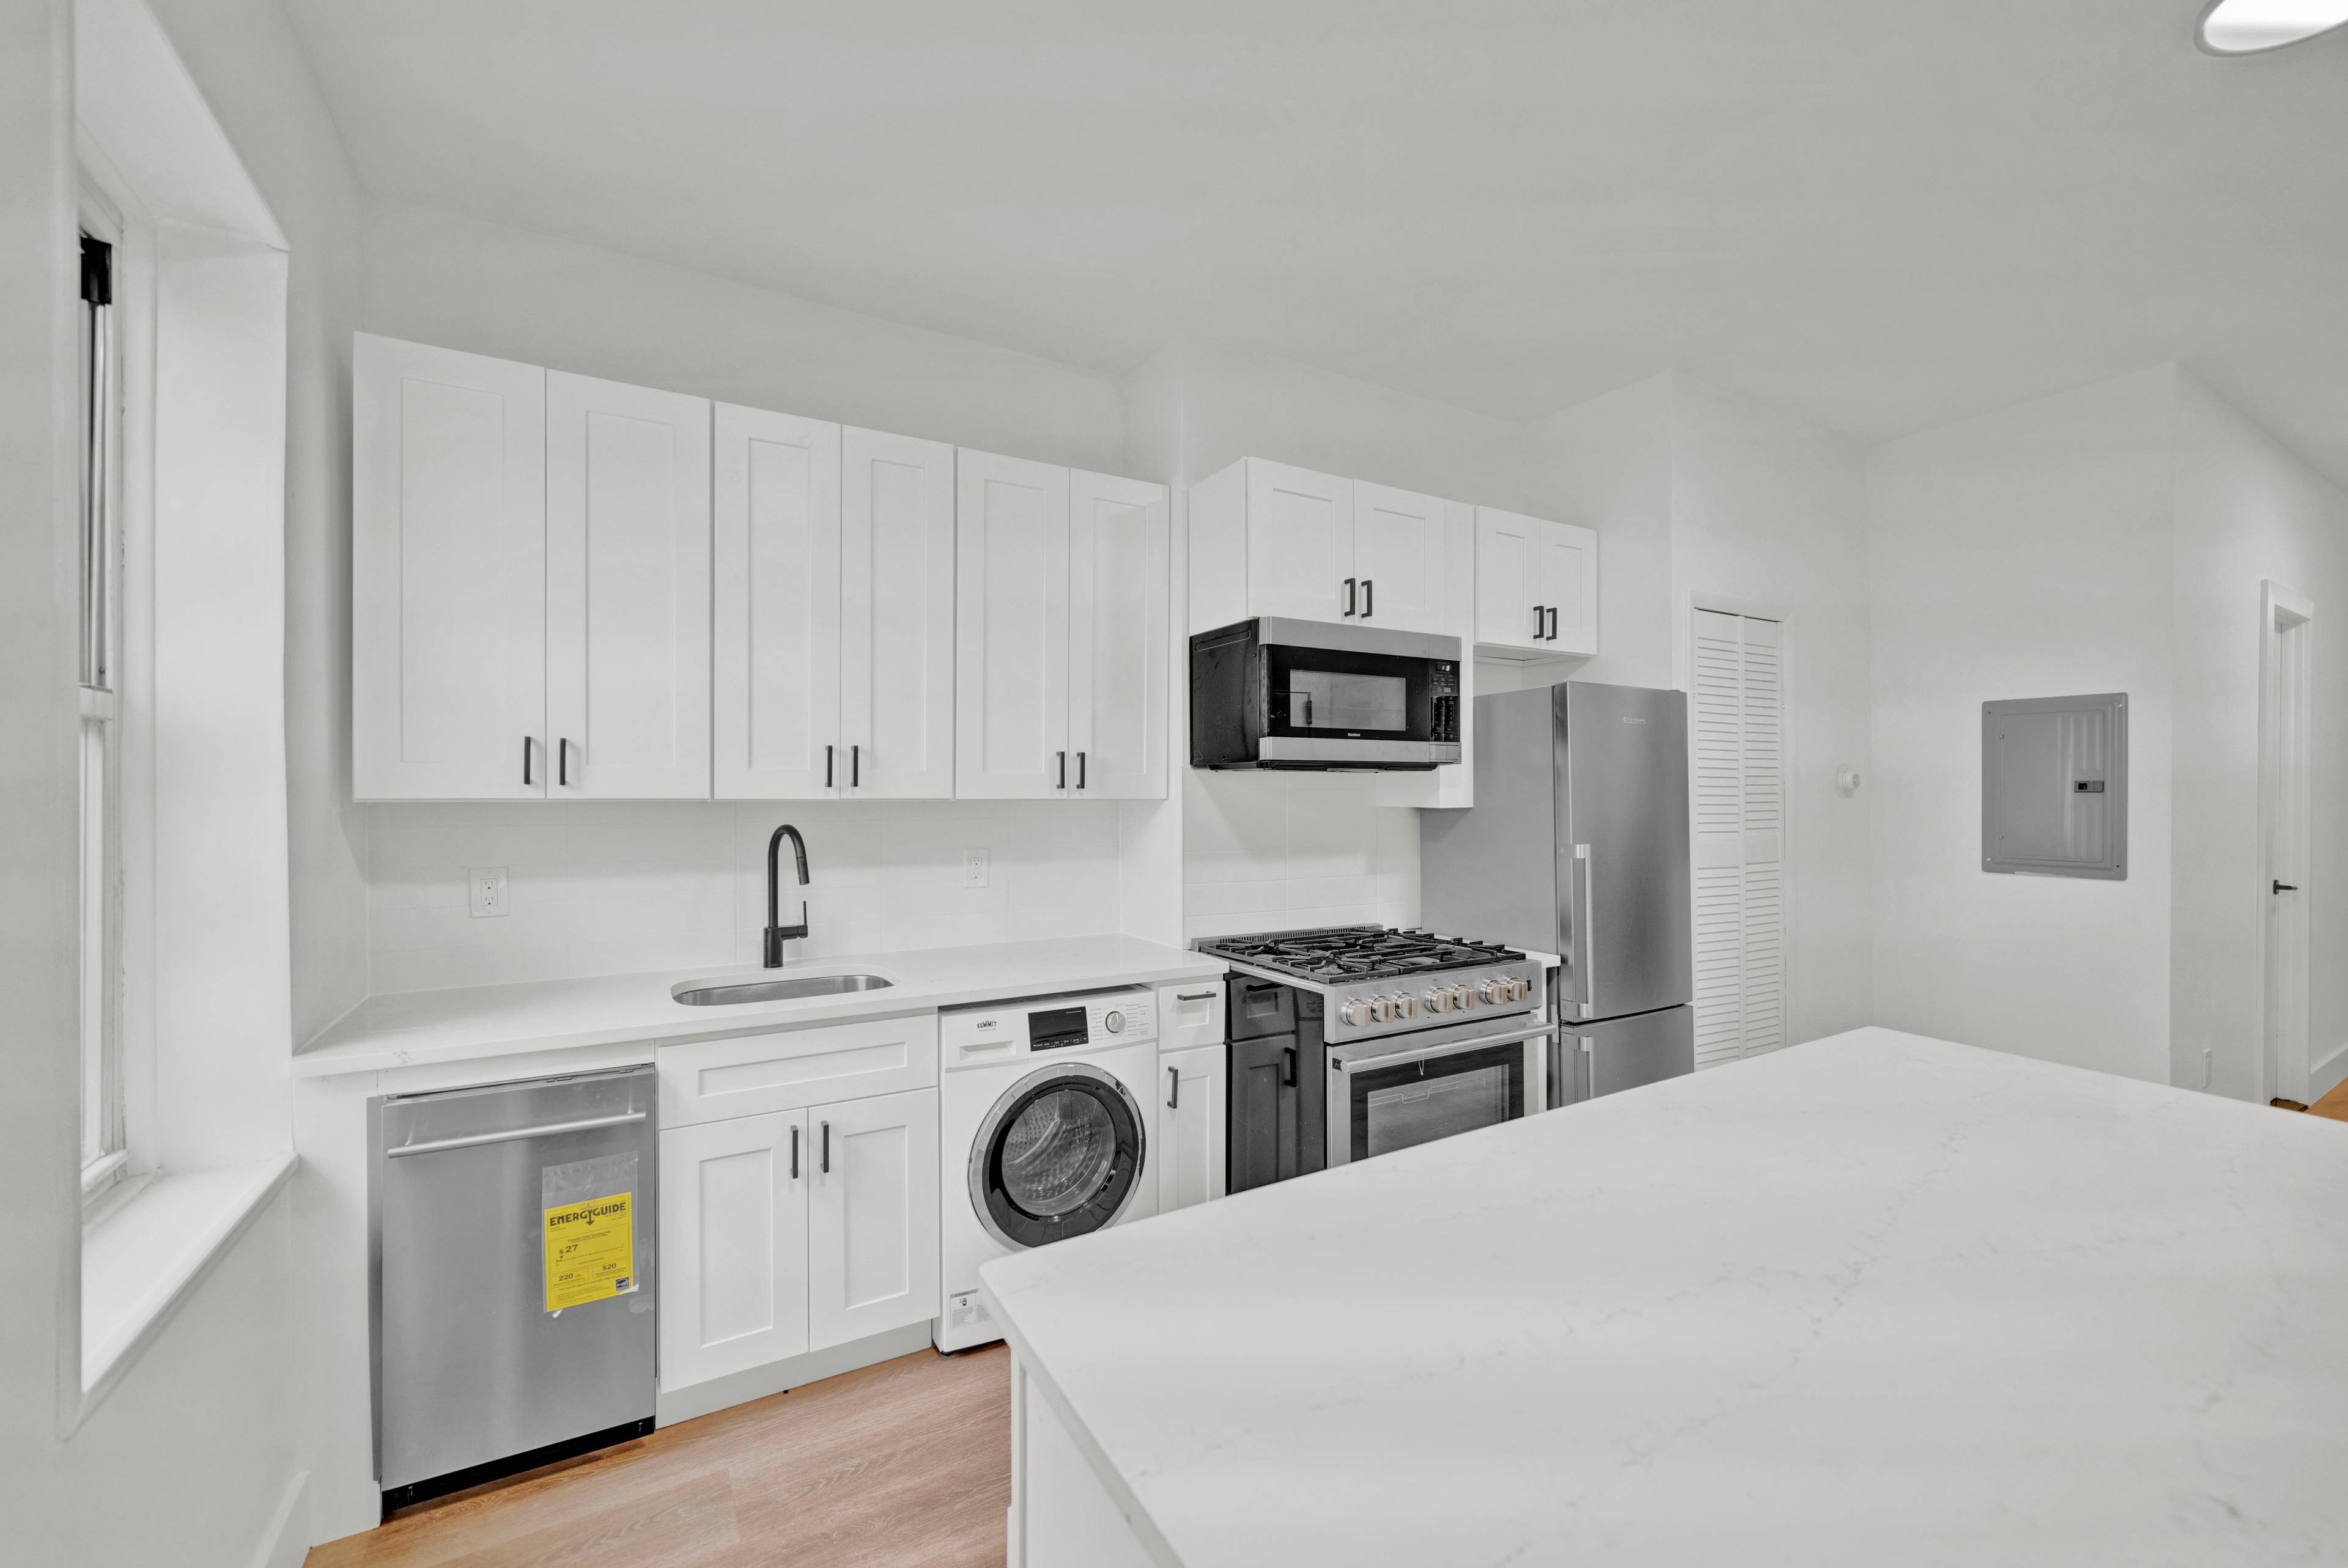 Open Layout 1 Bedroom Apartment in Hoboken NJ!  Washer/Dryer Combo Unit in the Apartment!  Shared Backyard.